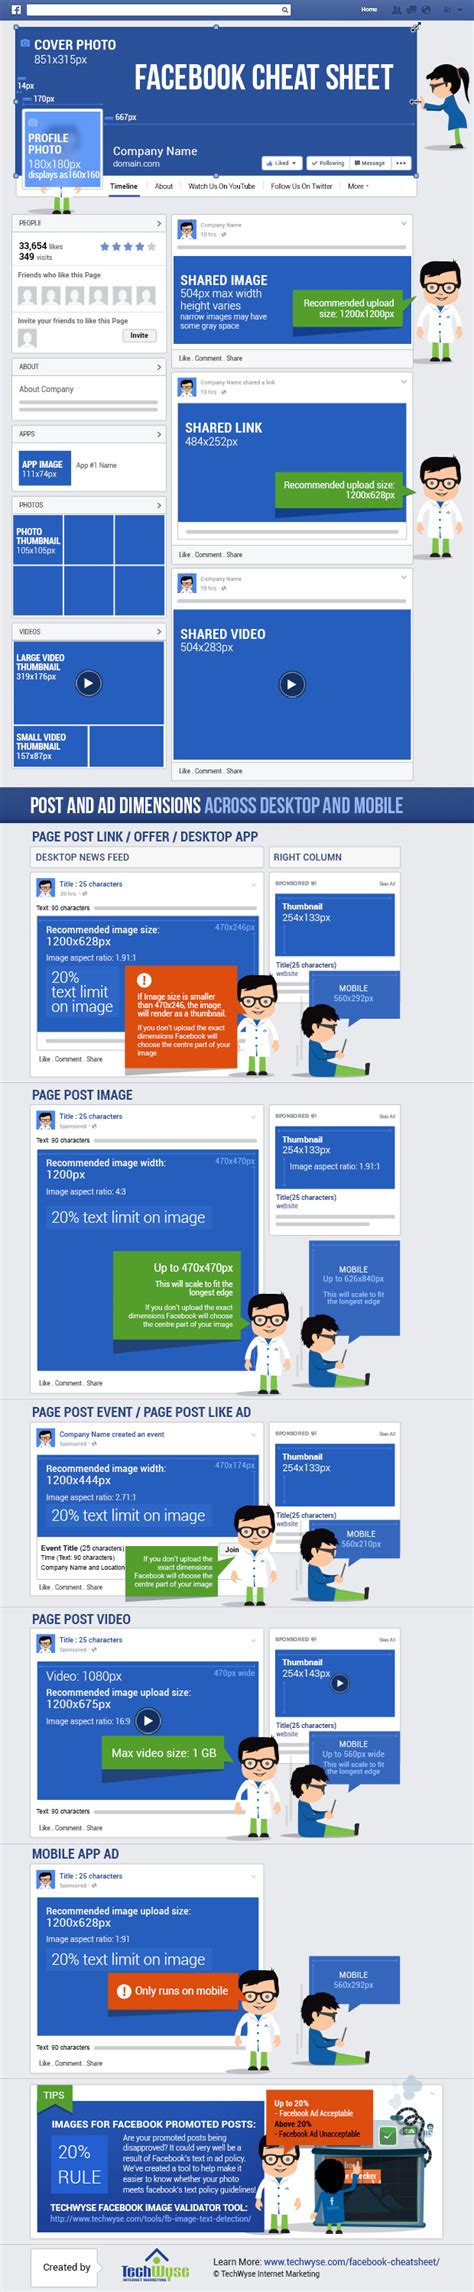 The Complete Facebook Image Sizes And Dimensions Cheatsheet 2019